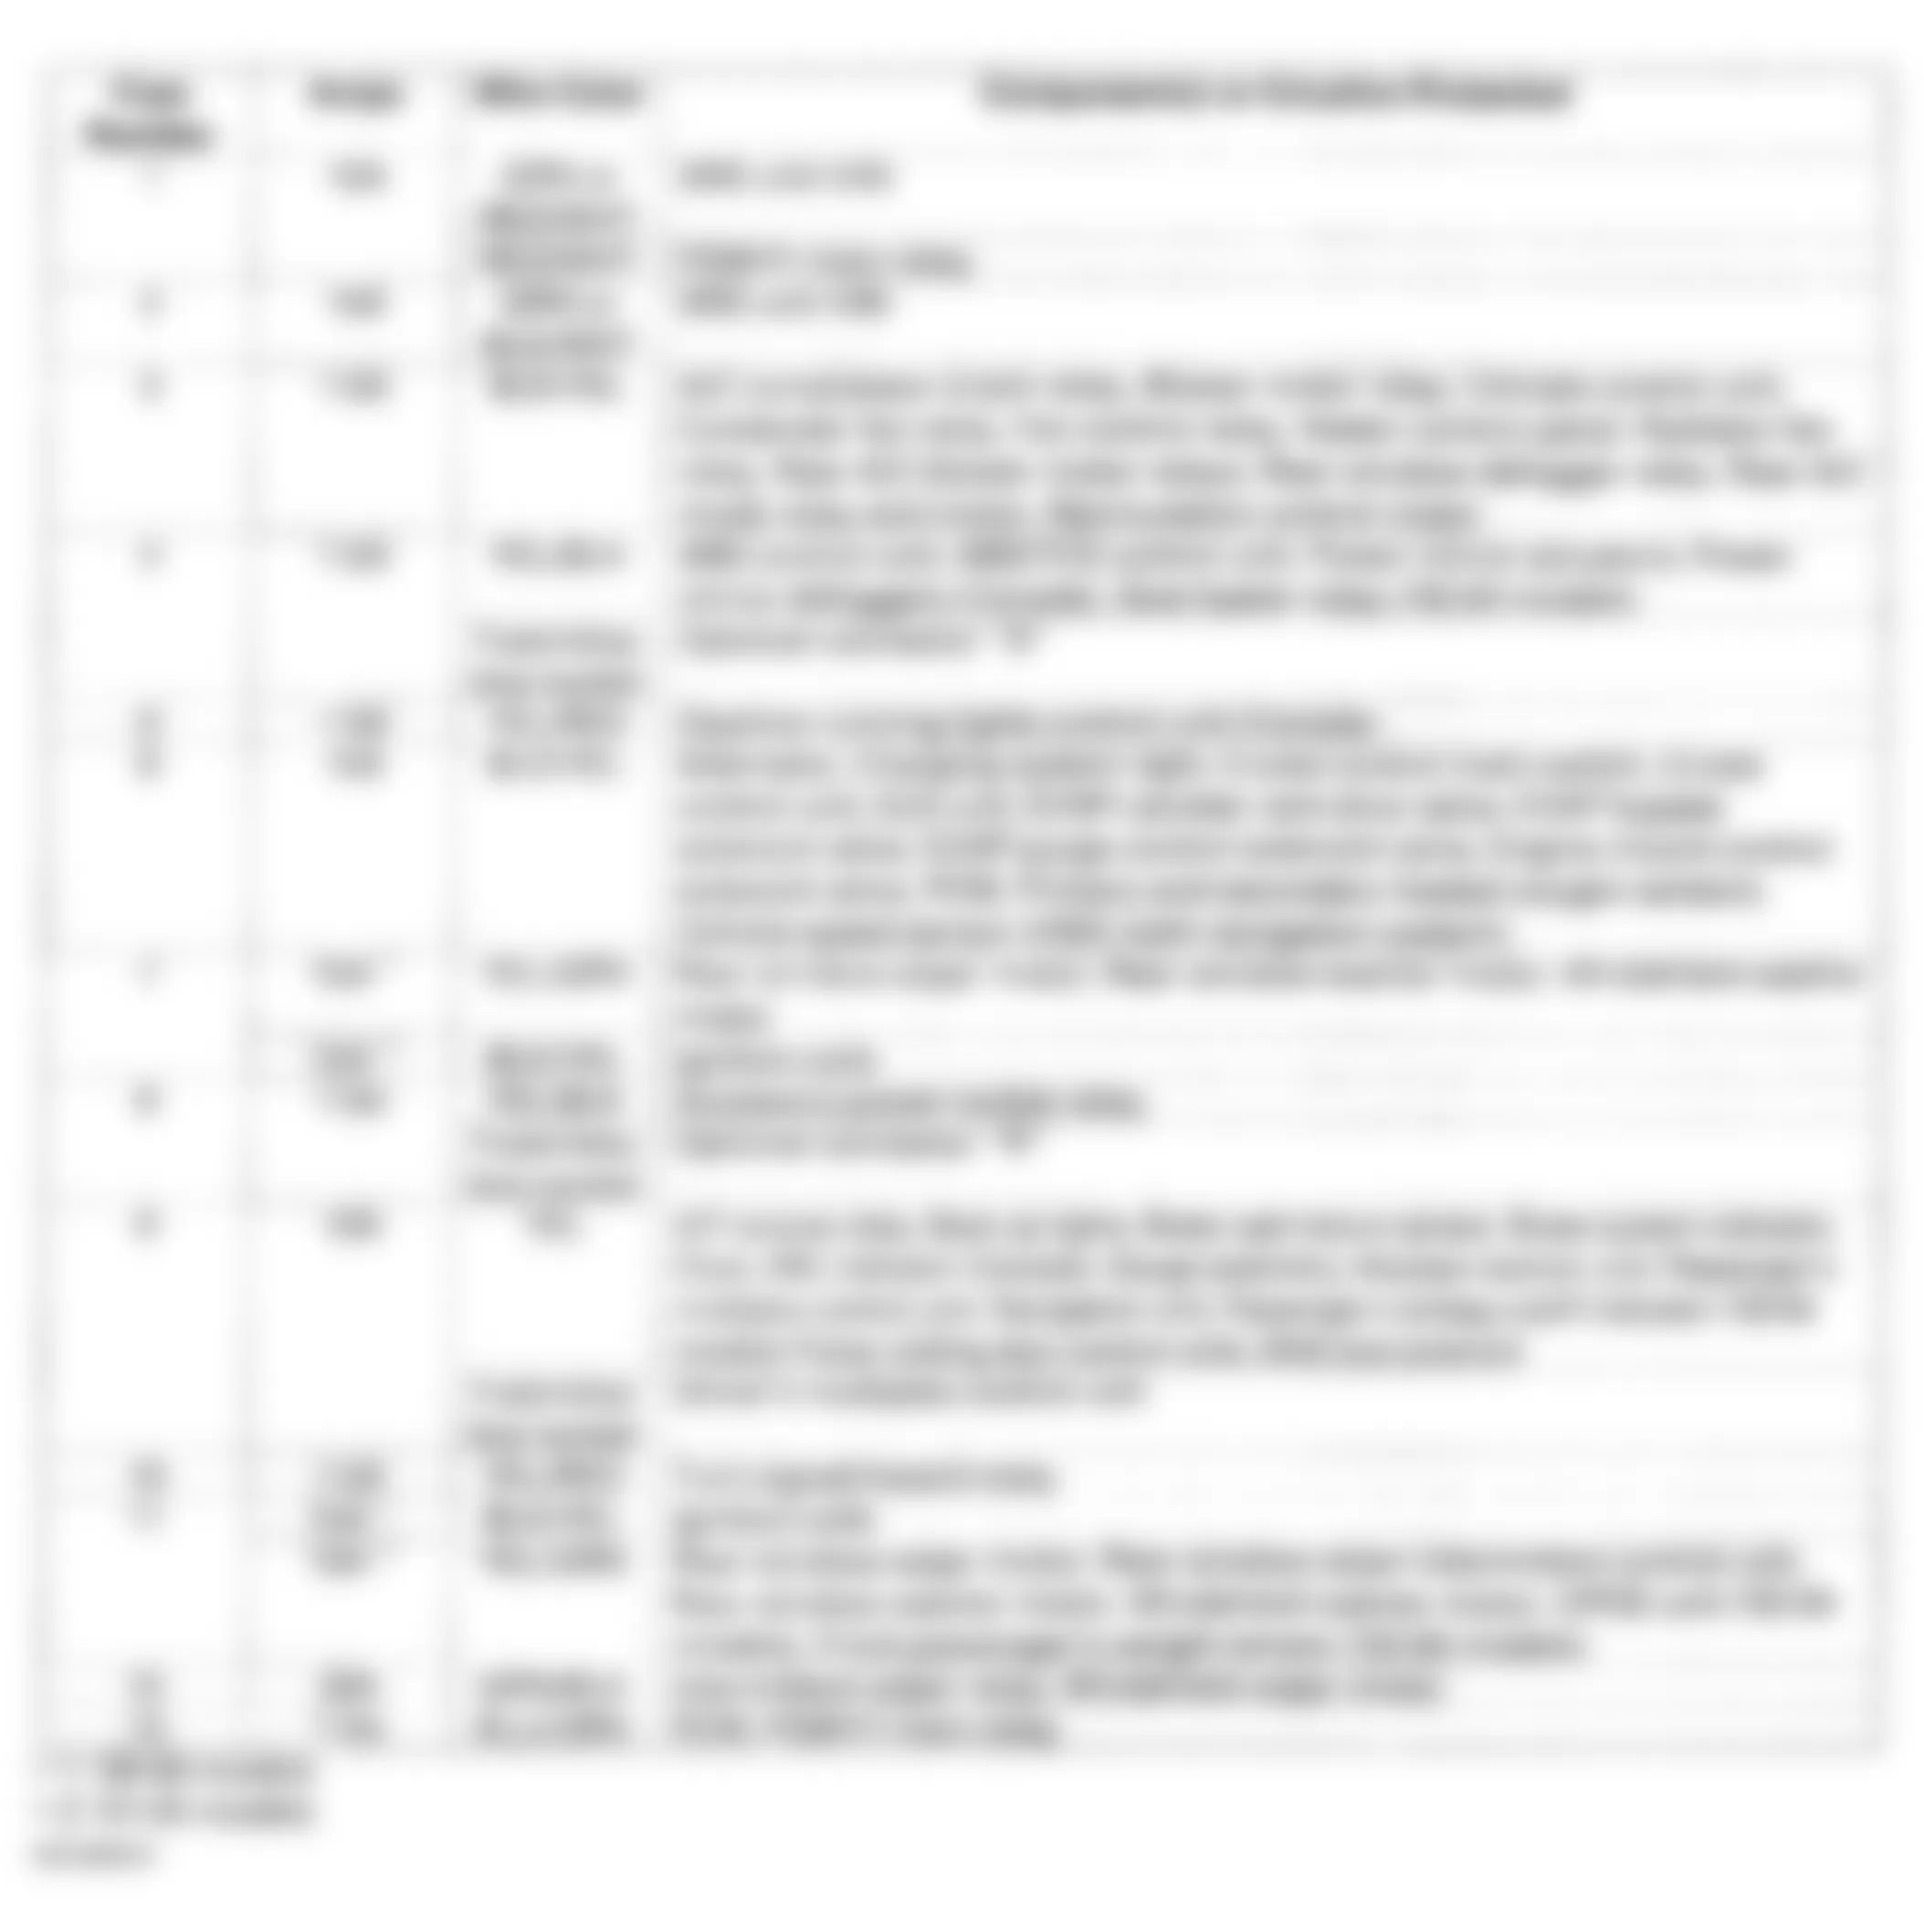 Honda Odyssey LX 2000 - Component Locations -  Drivers Under-Dash Fuse/Relay Box Identification Chart